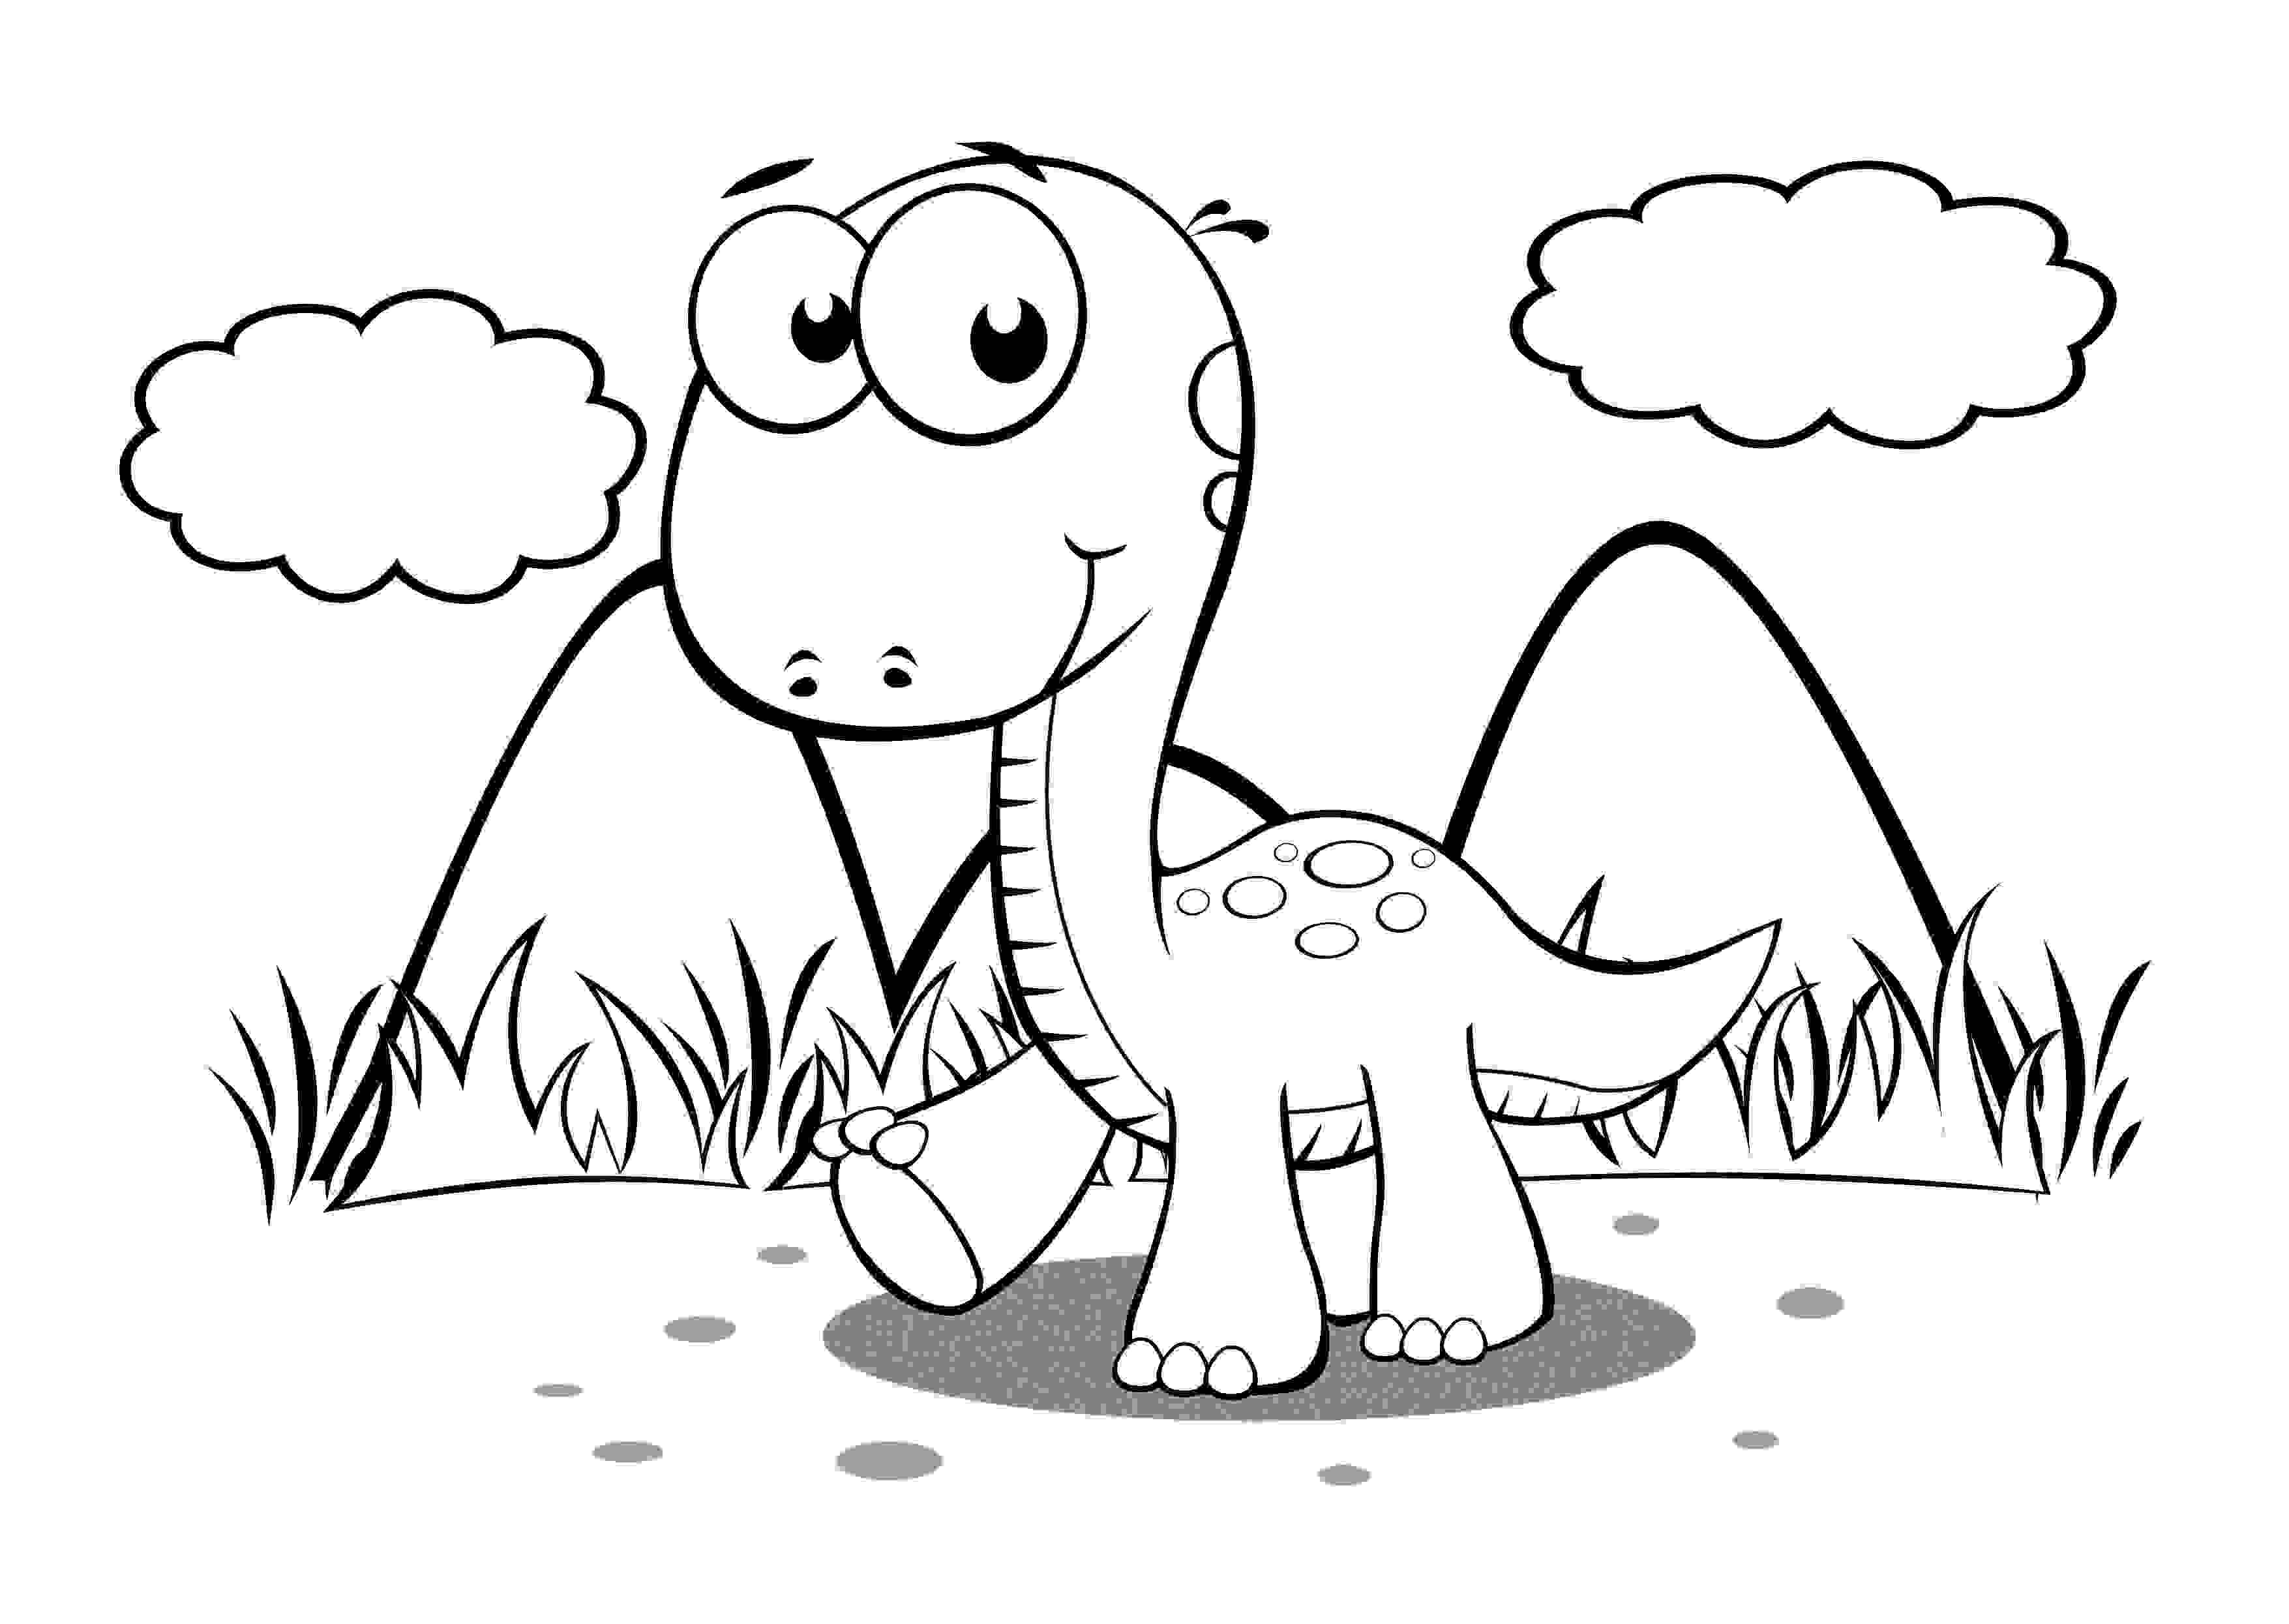 Baby Dinosaur goes around on cloud day Coloring Pages   Dinosaurs ...